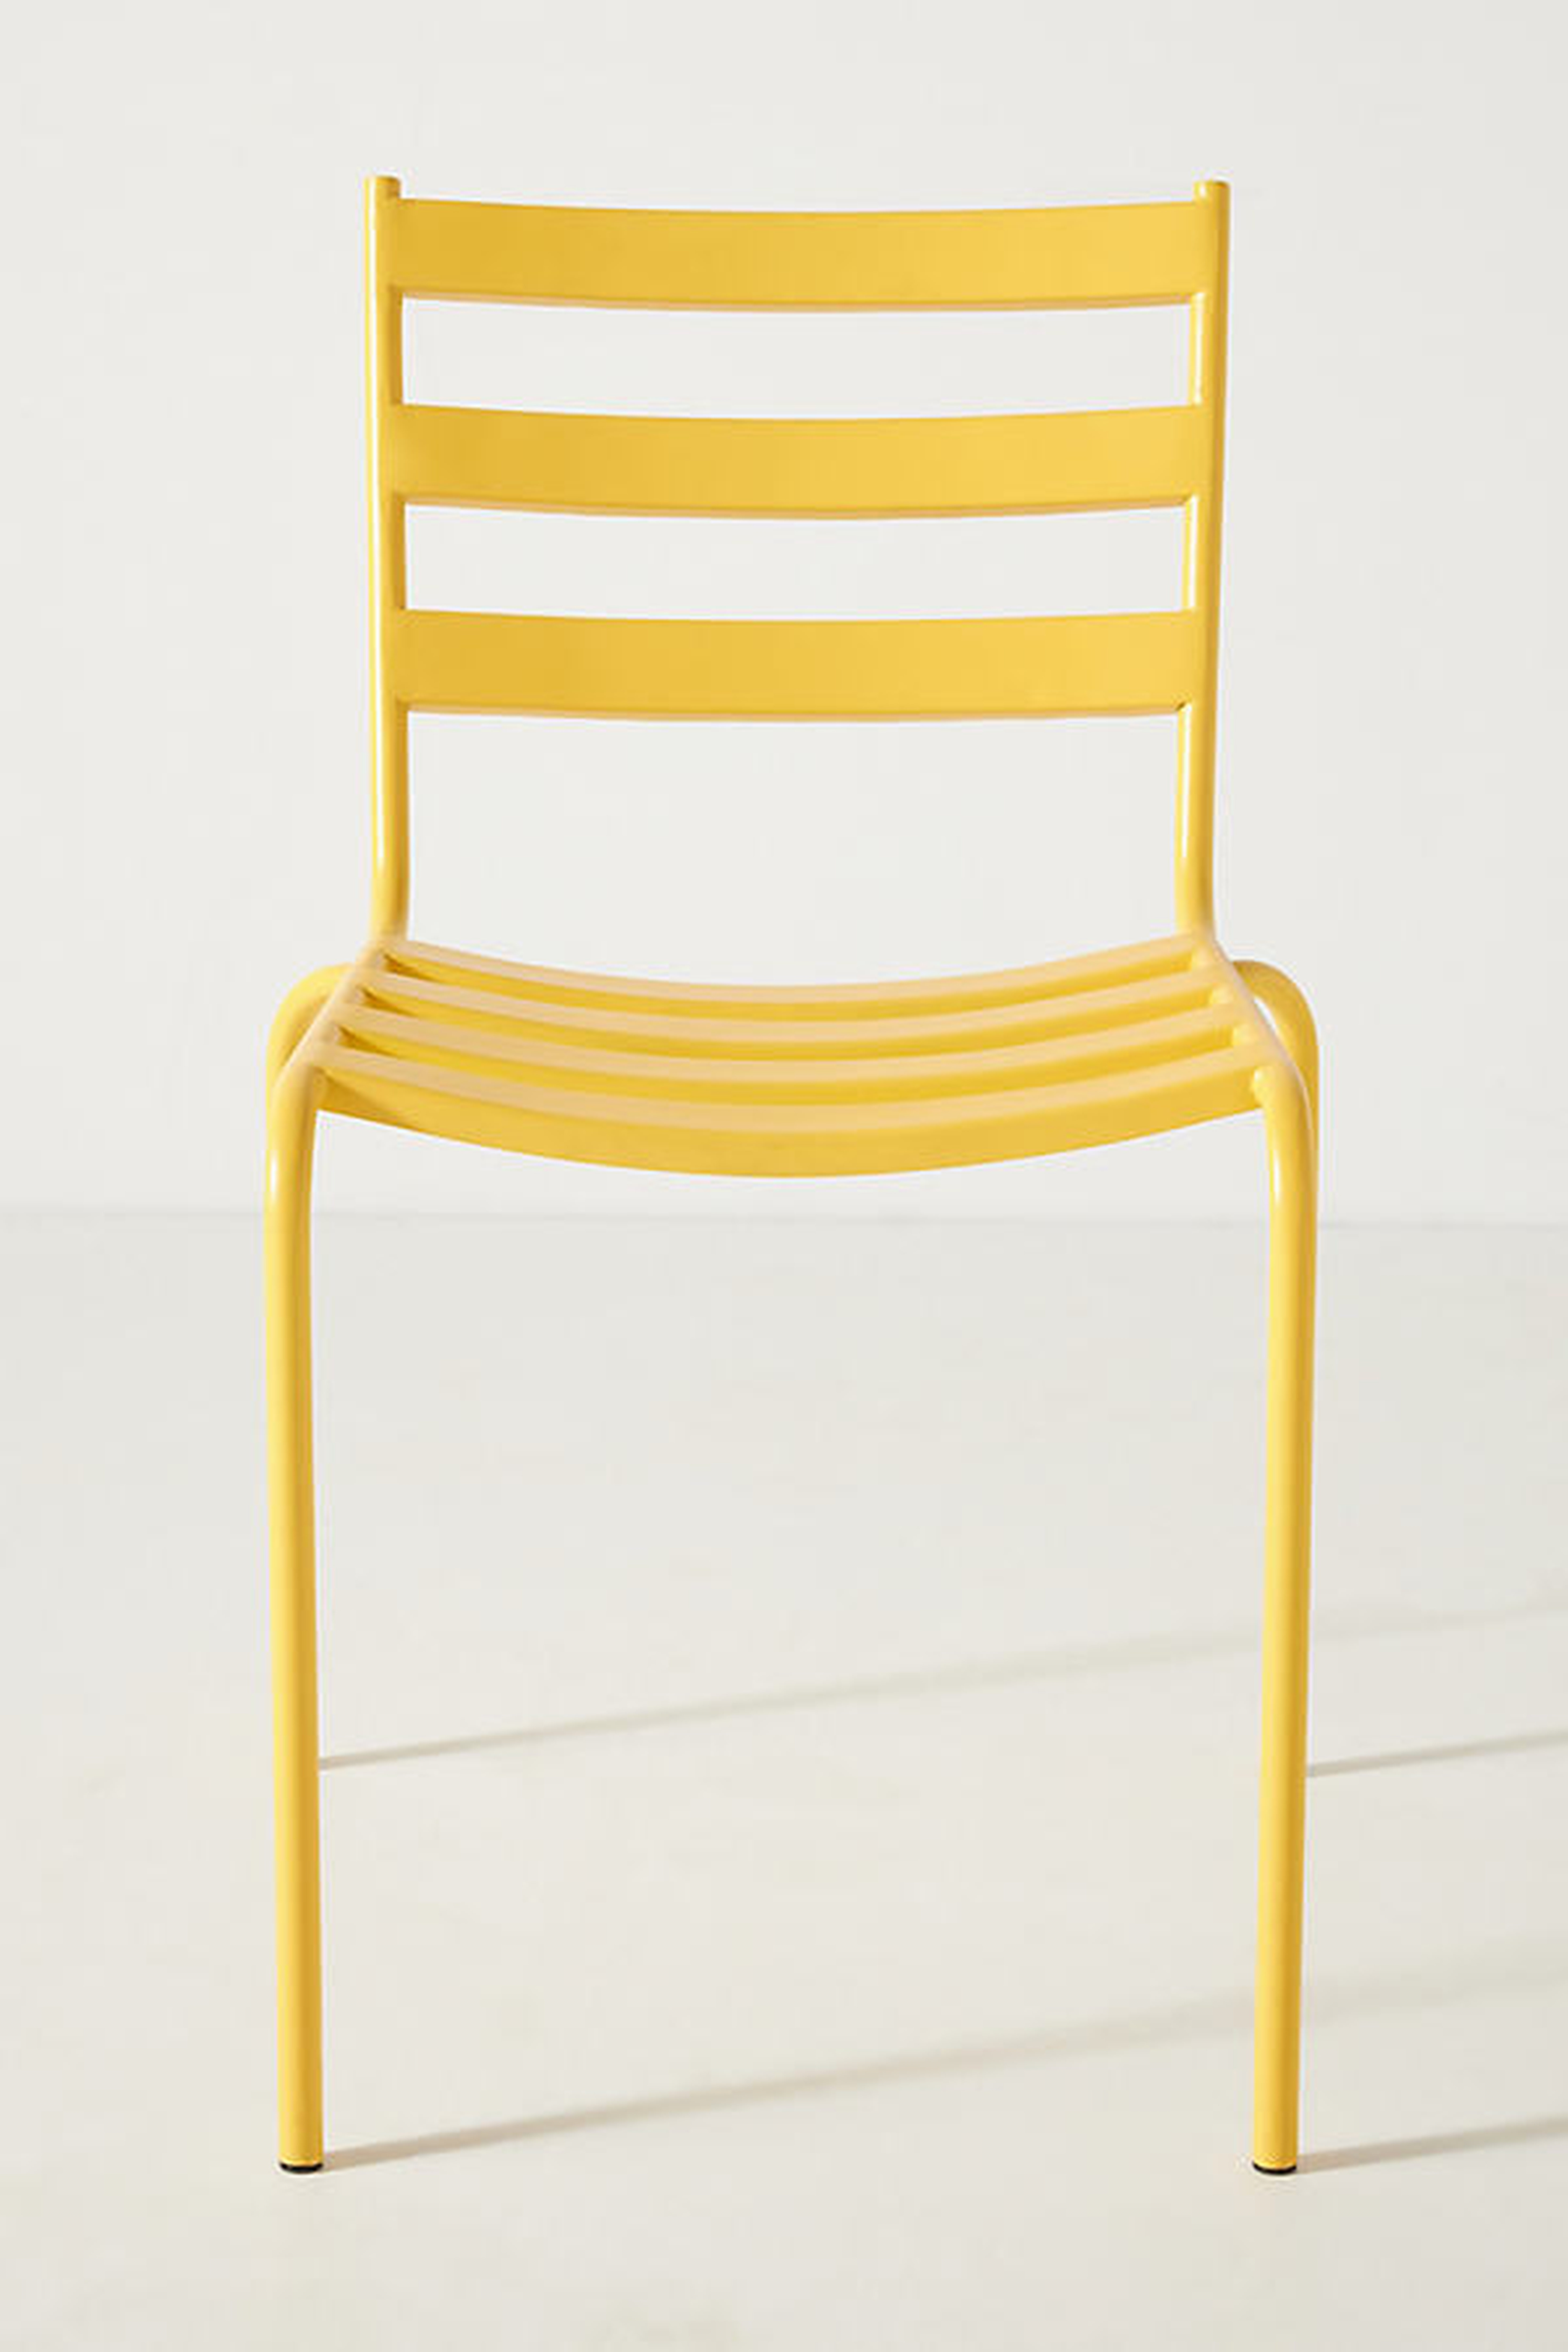 Alsace Outdoor Garden Chairs, Set of 2 By Anthropologie in Yellow - Anthropologie